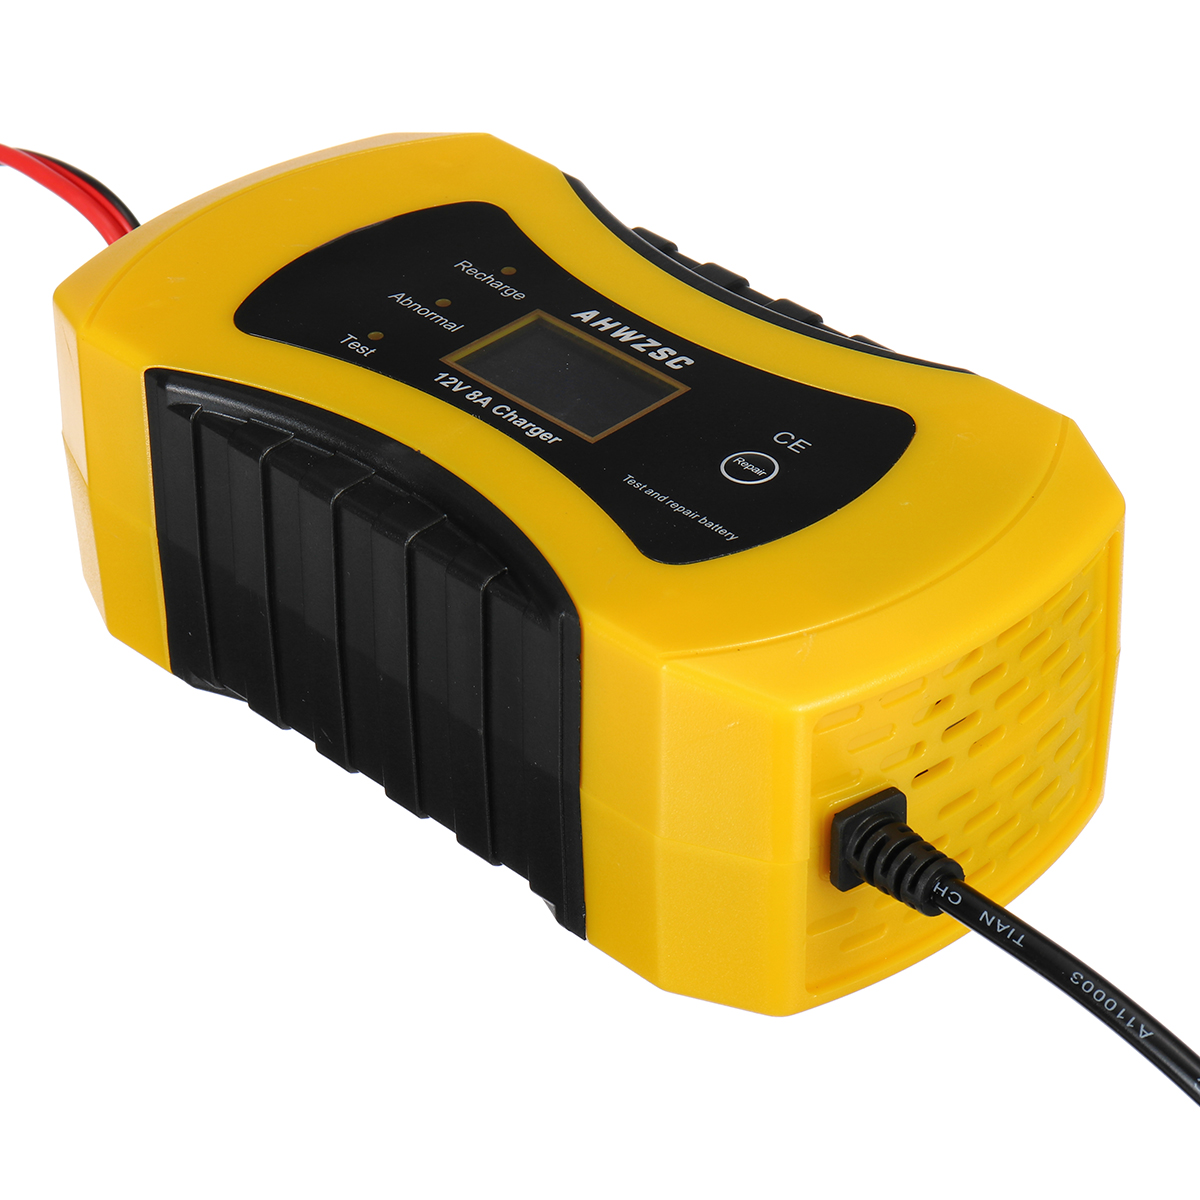 12V 8A LCD Pulse Repair Battery Charger for Car Motorcycle AGM Gel Wet Lead Acid